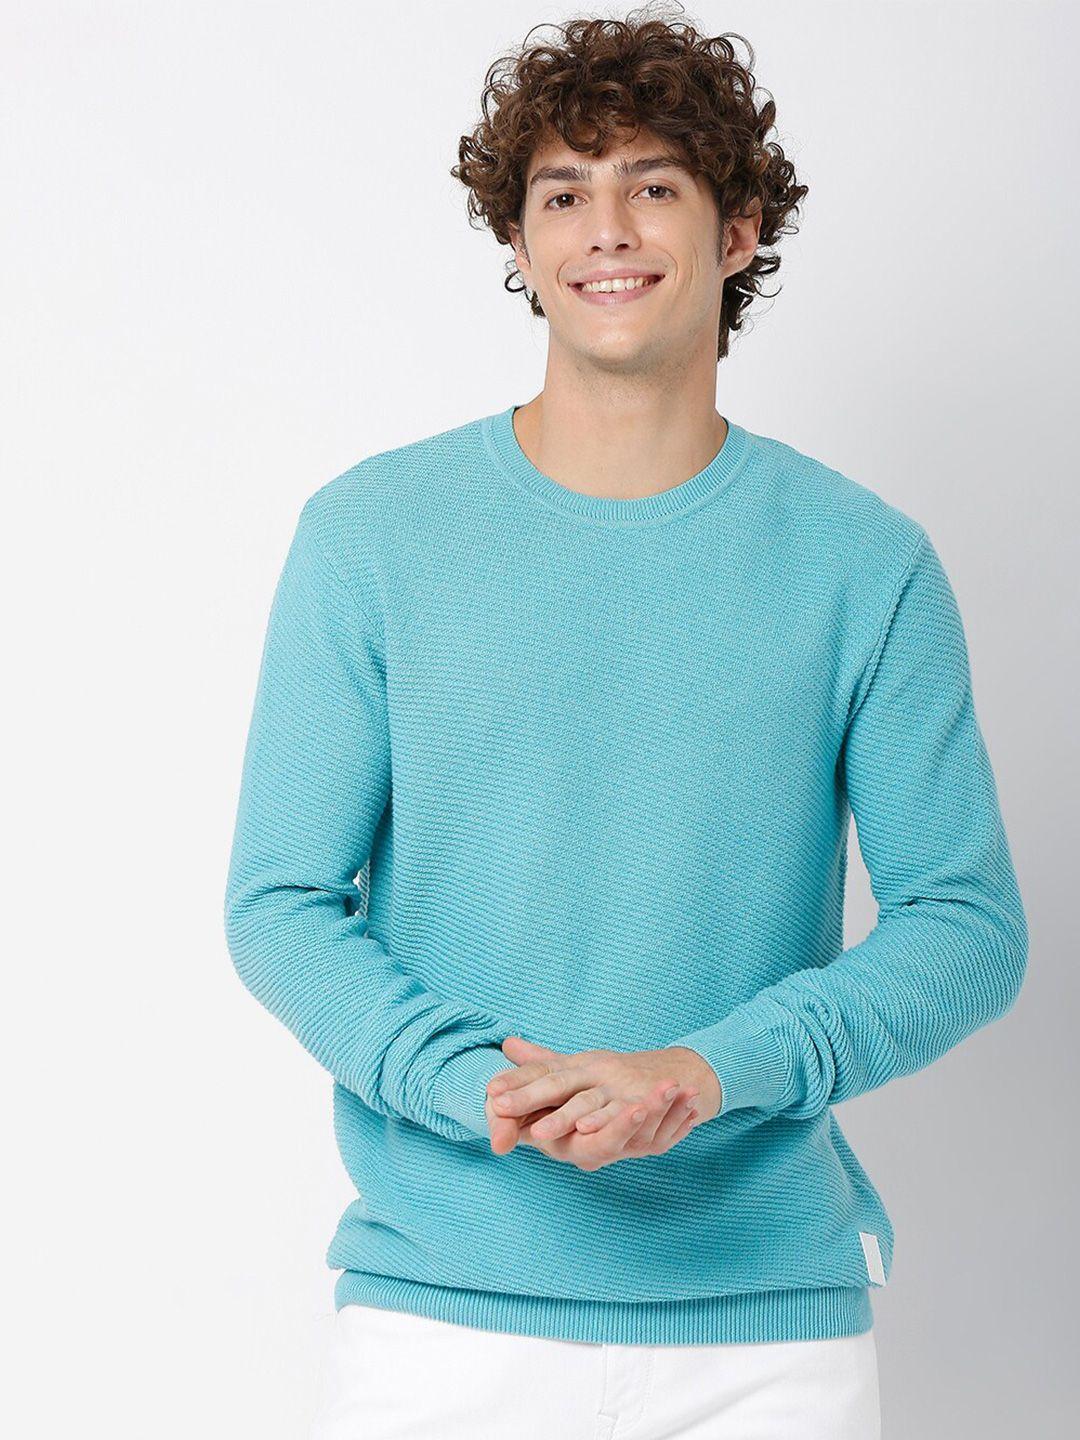 mufti-men-blue-solid-round-neck-full-sleeves-pullover